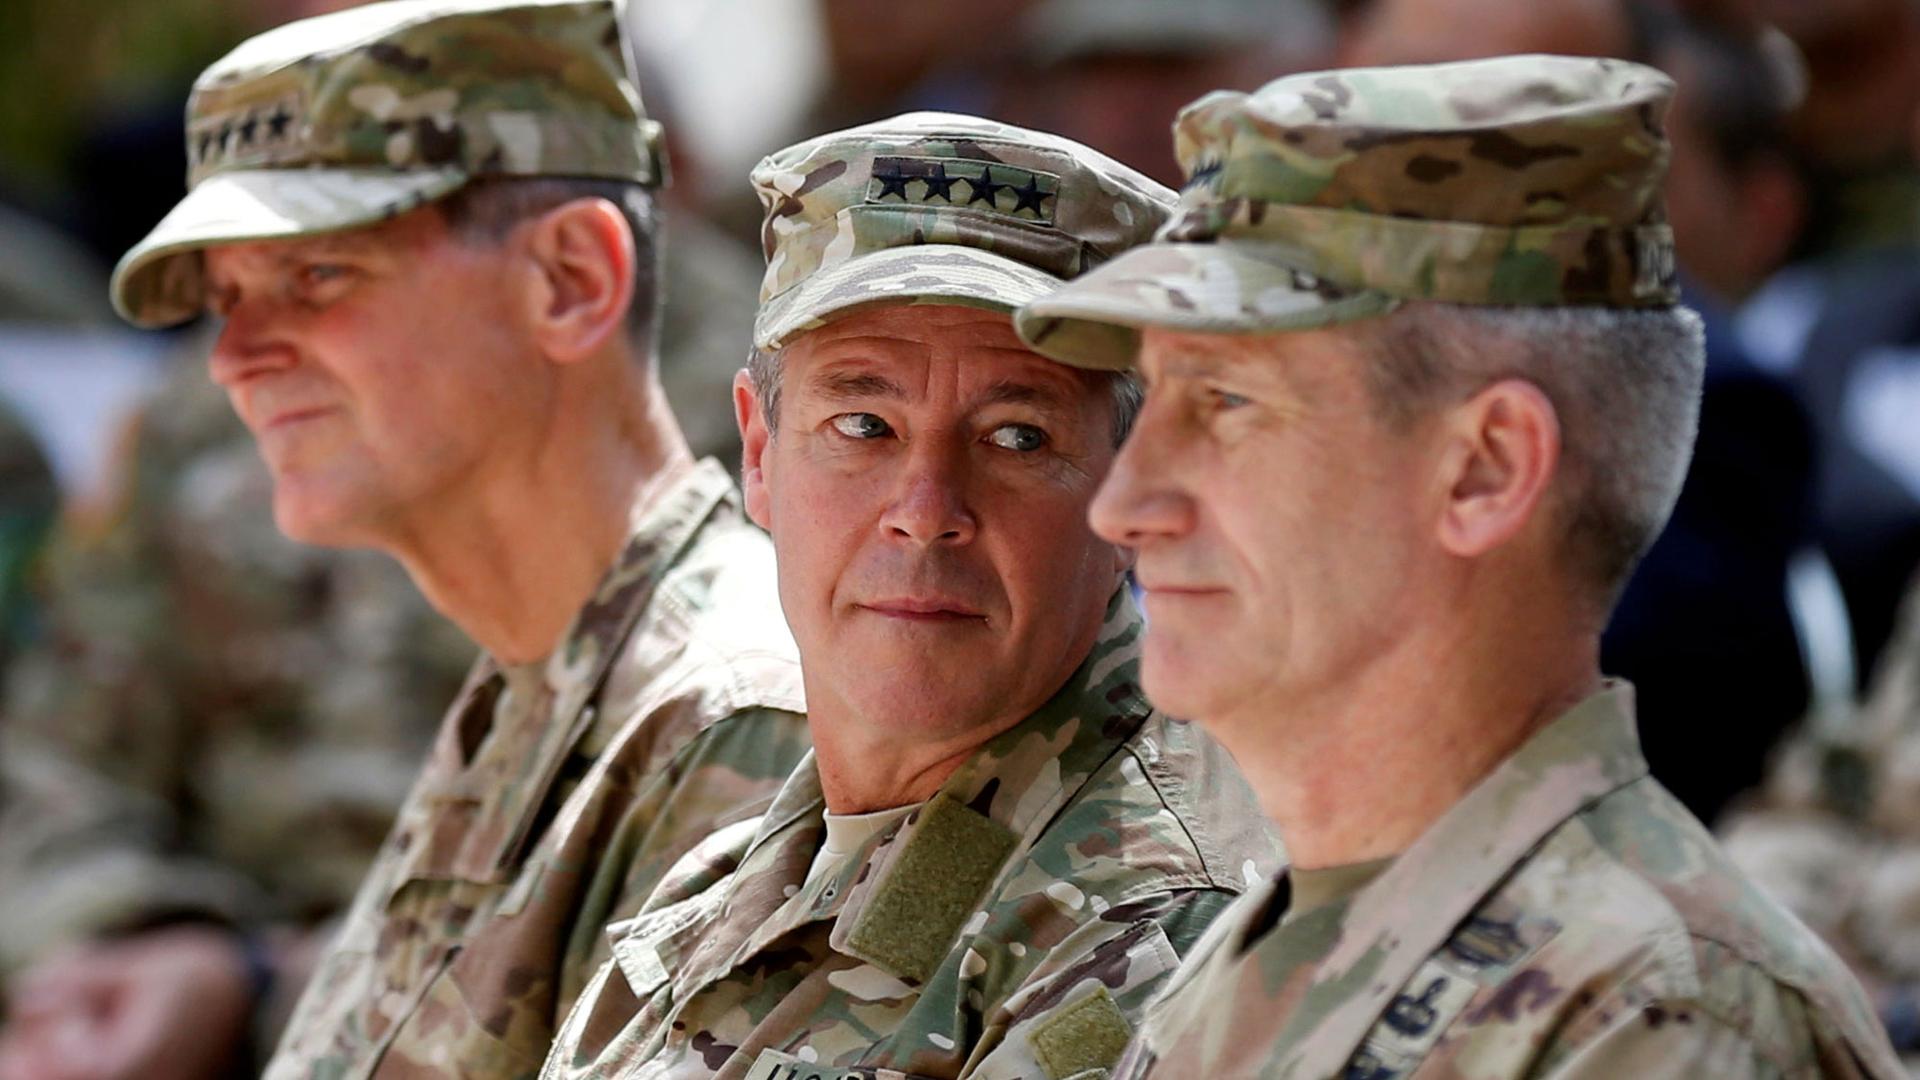 US Army General Scott Miller is shown center looking over his left shoulder and wearing fatigues.